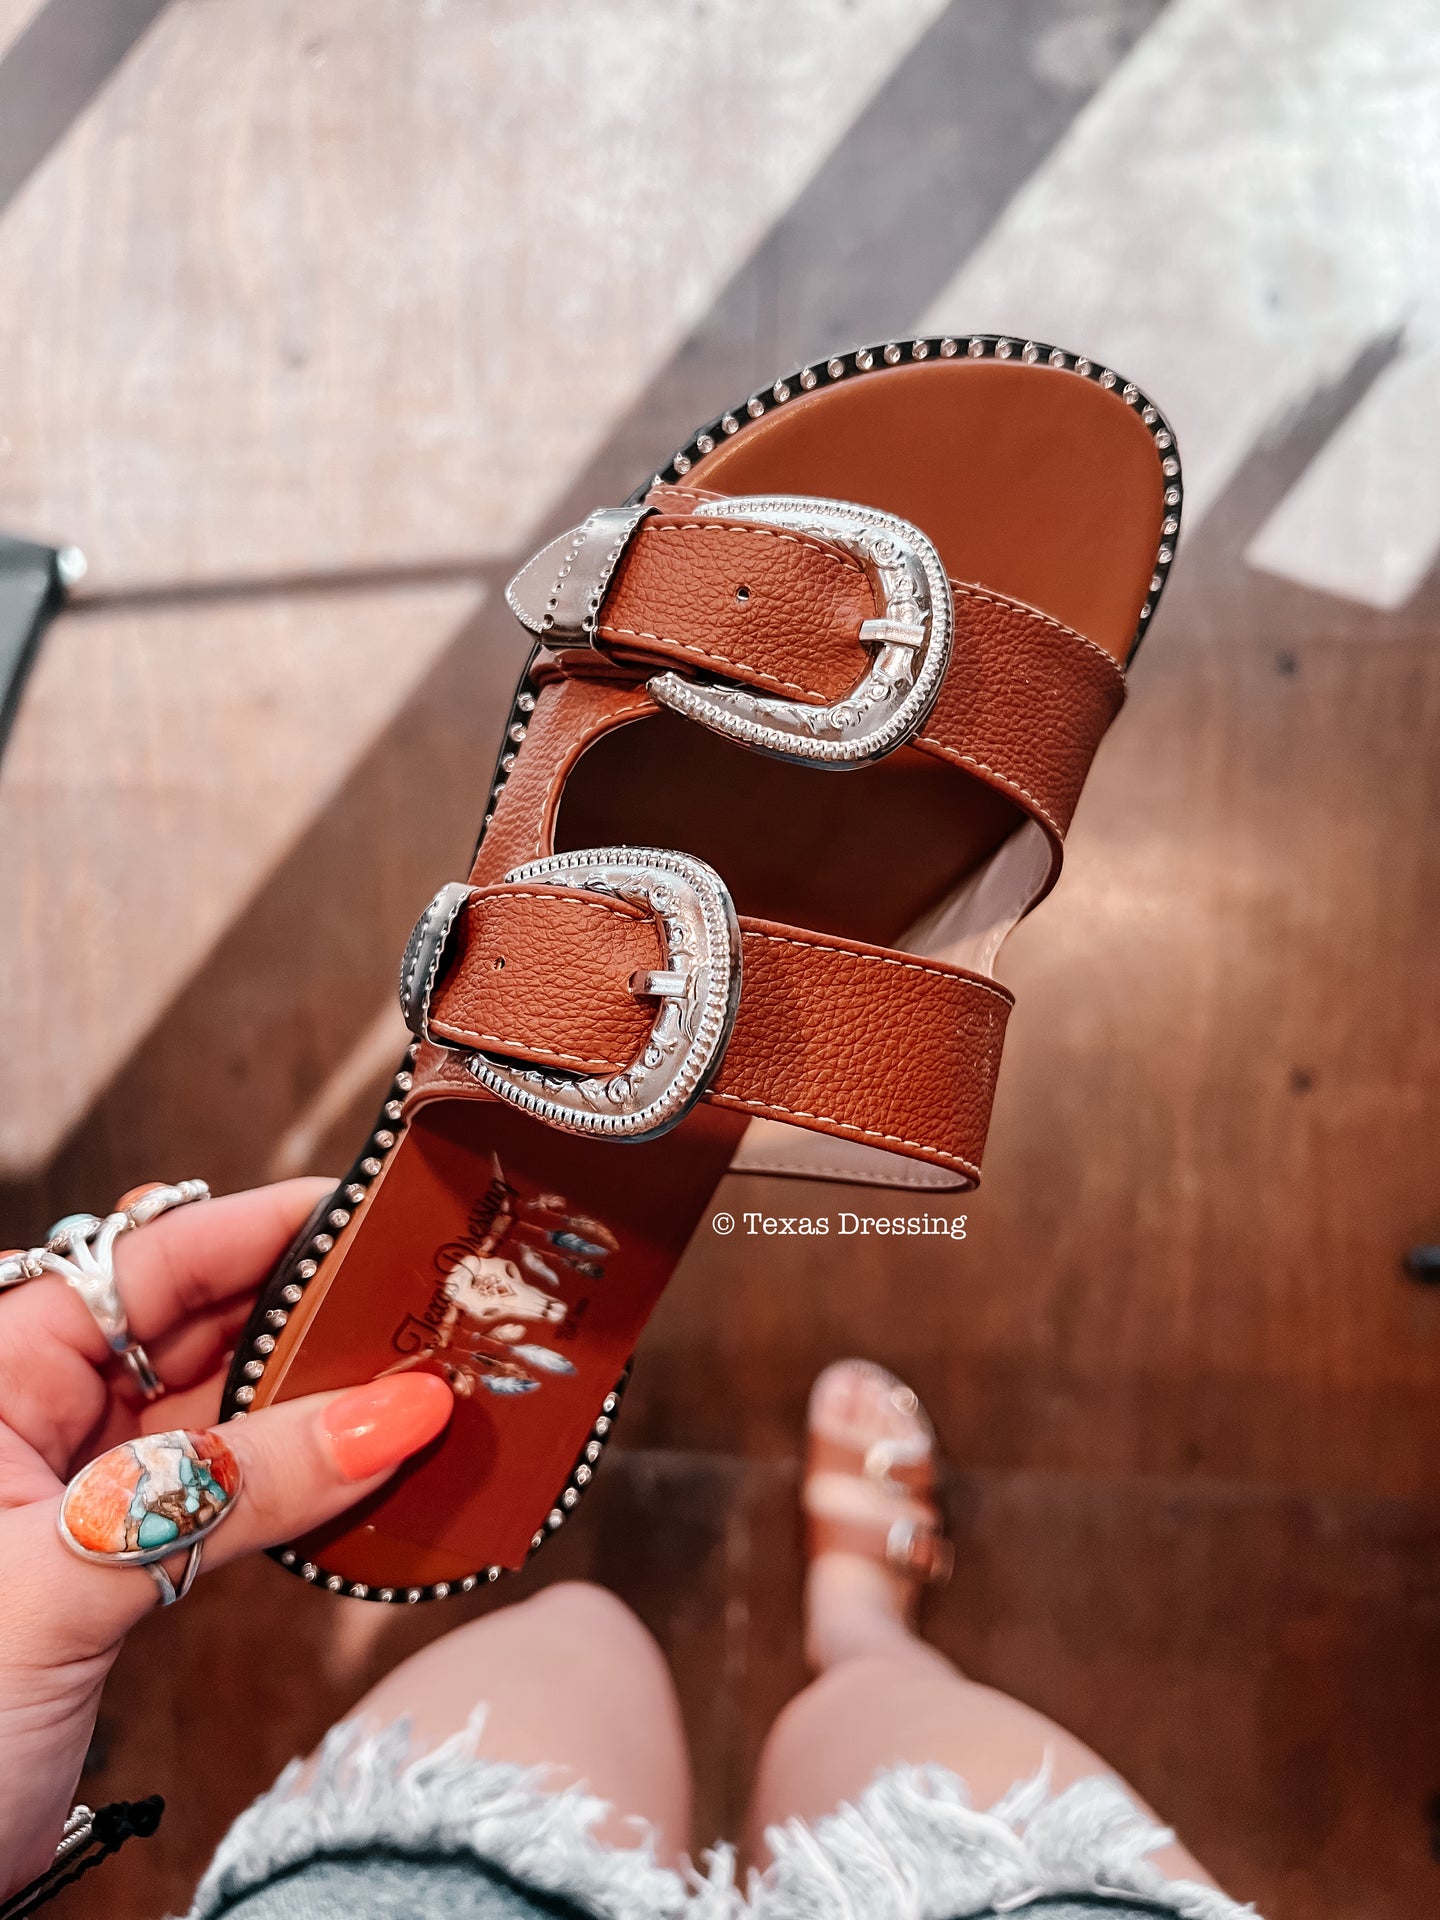 Second Rodeo - Tan Buckle Sandals